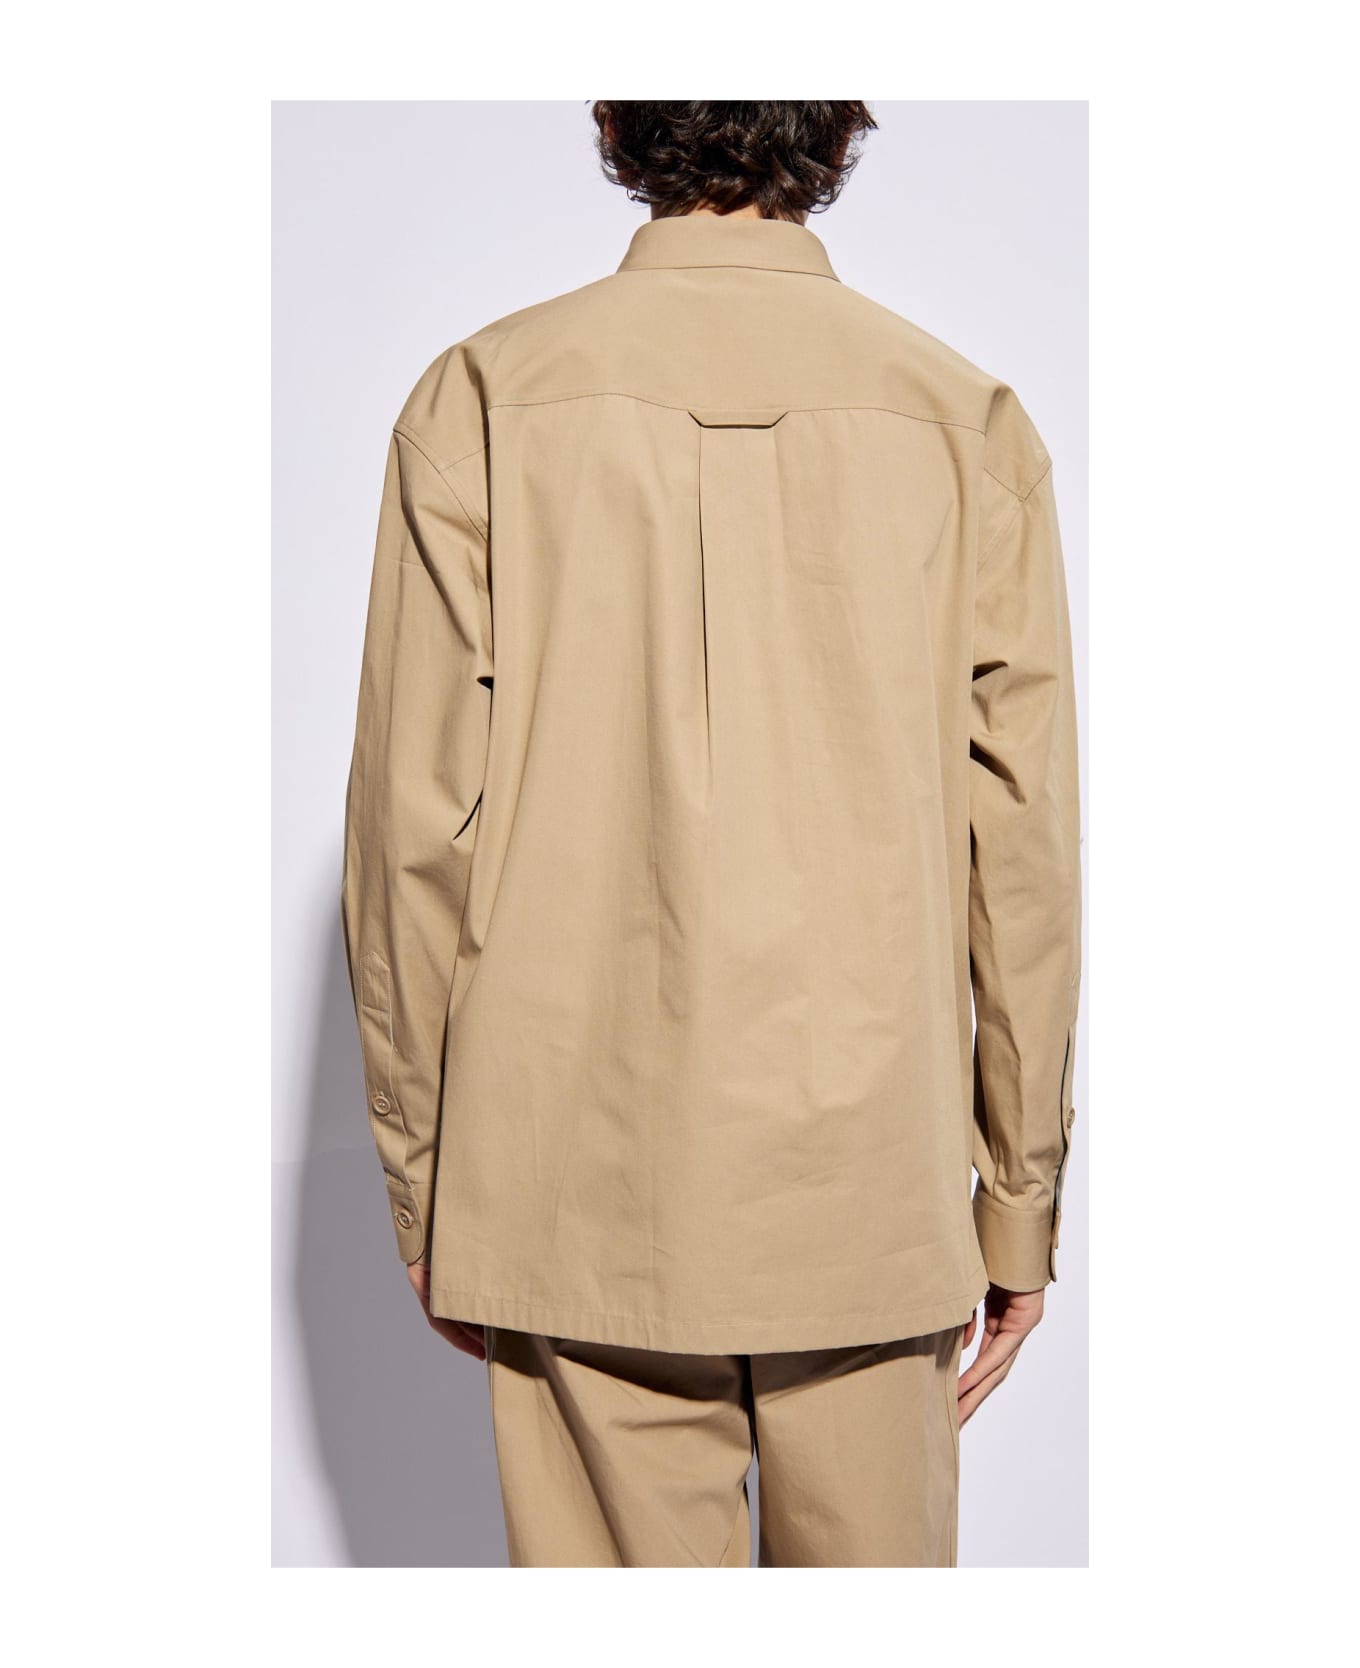 Gucci Cotton Shirt With Pocket - Beige シャツ